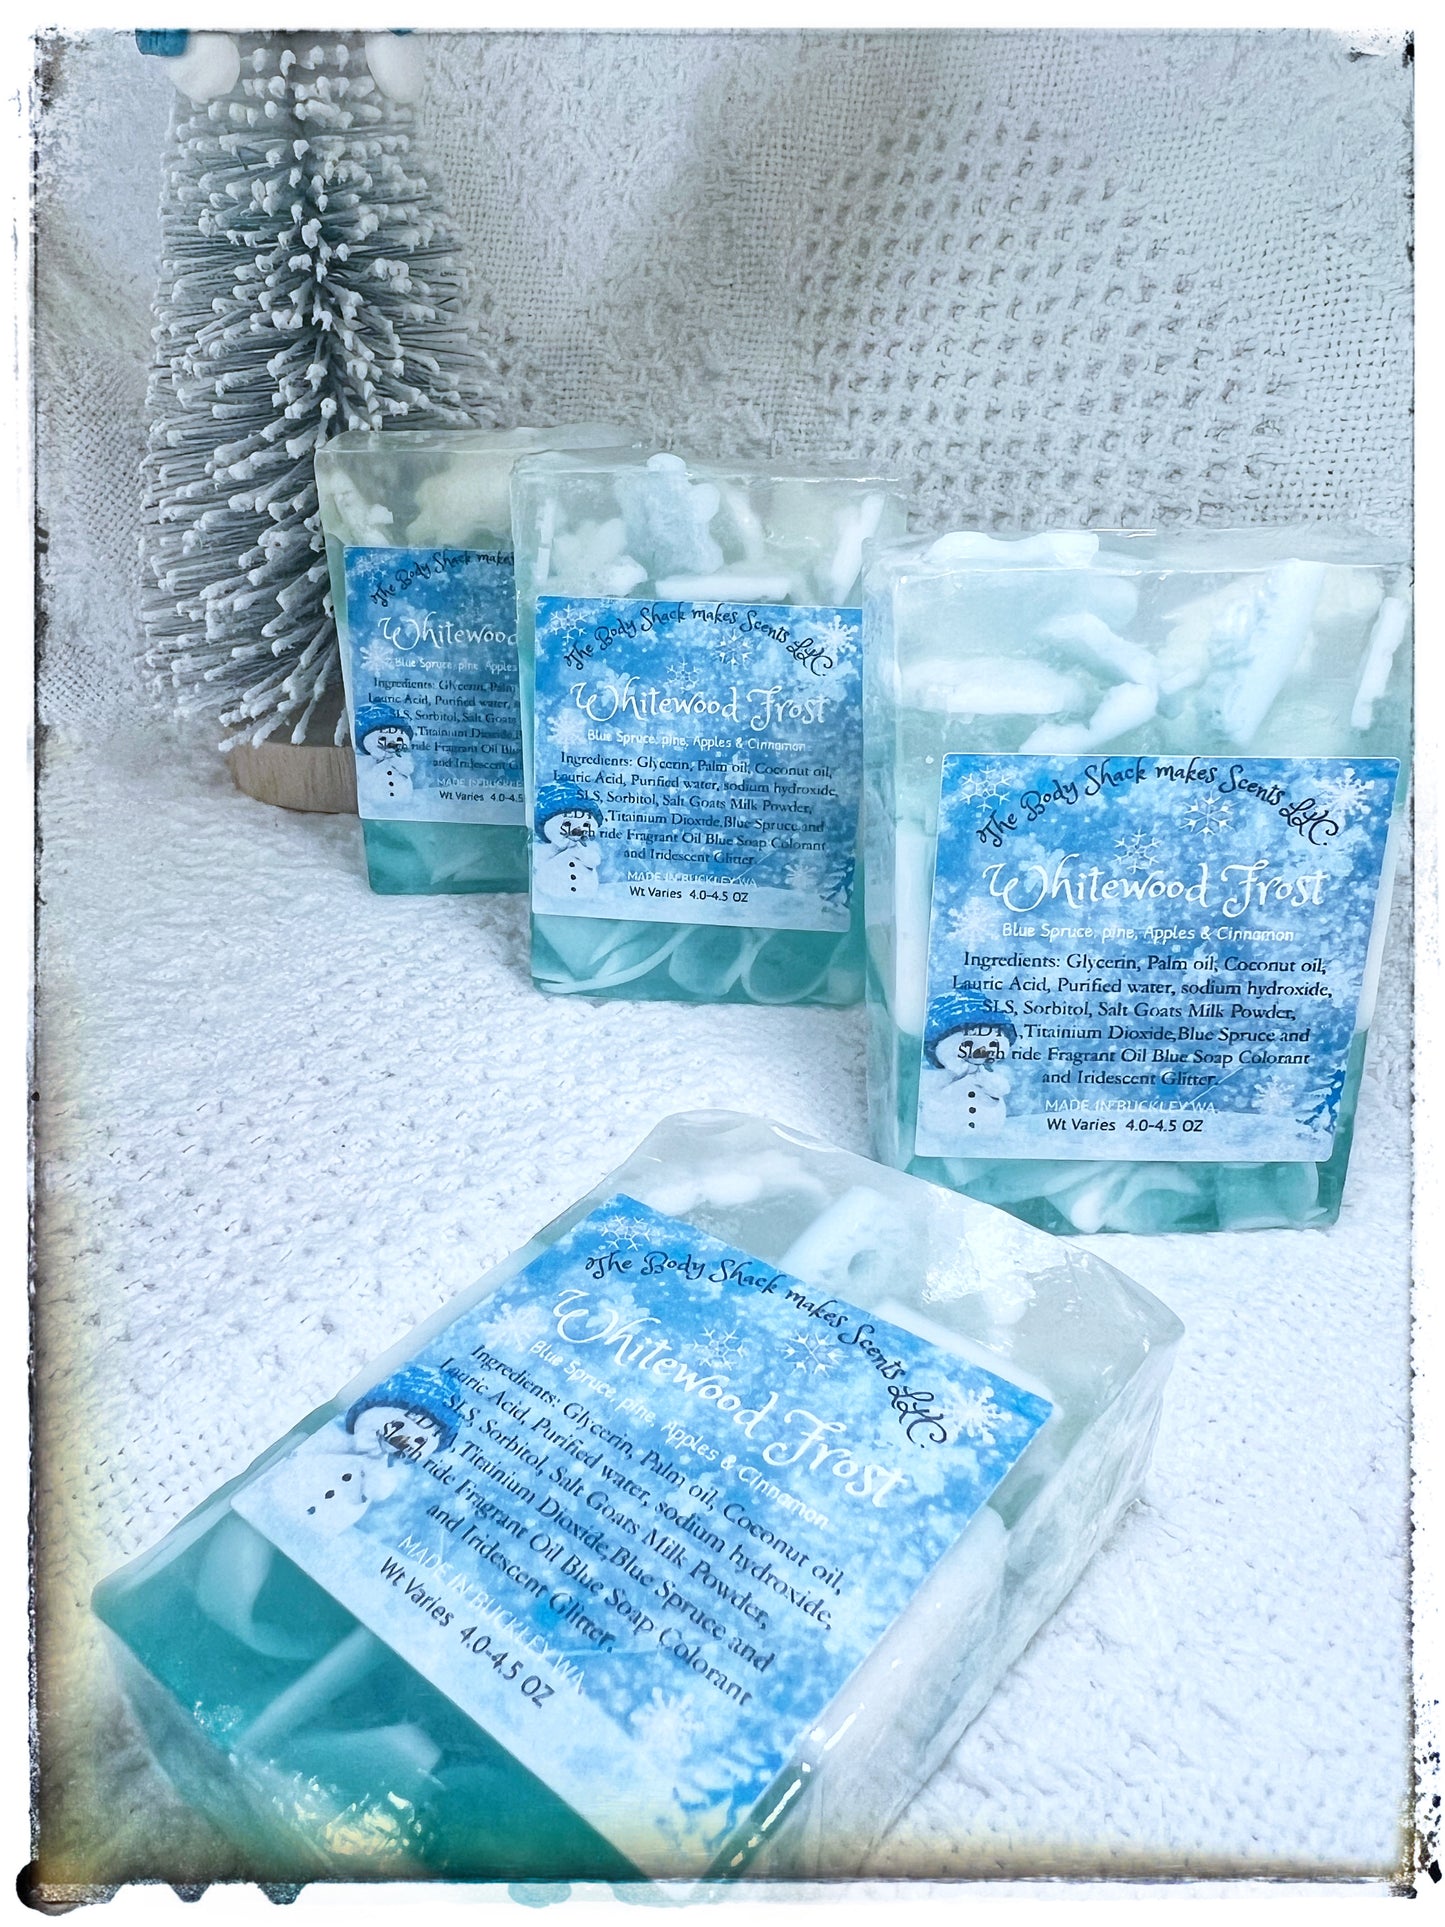 Whitewood Frost Soap